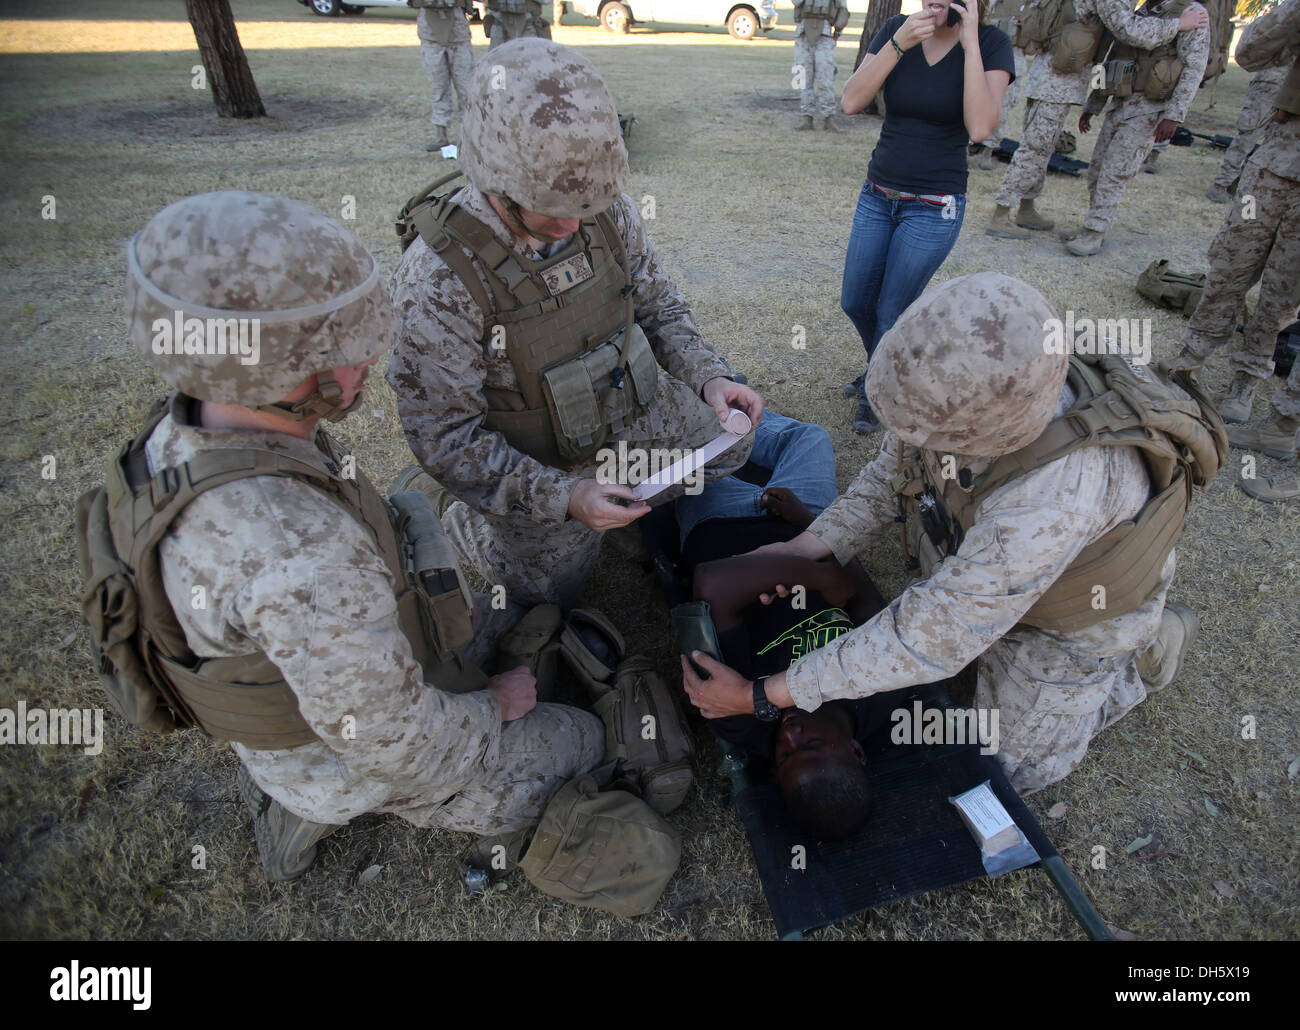 MARINE CORPS AIR STATION YUMA, Ariz. – Corpsmen with 1st Battalion, 7th Marine Regiment, treat a role-player’s simulated injury Stock Photo